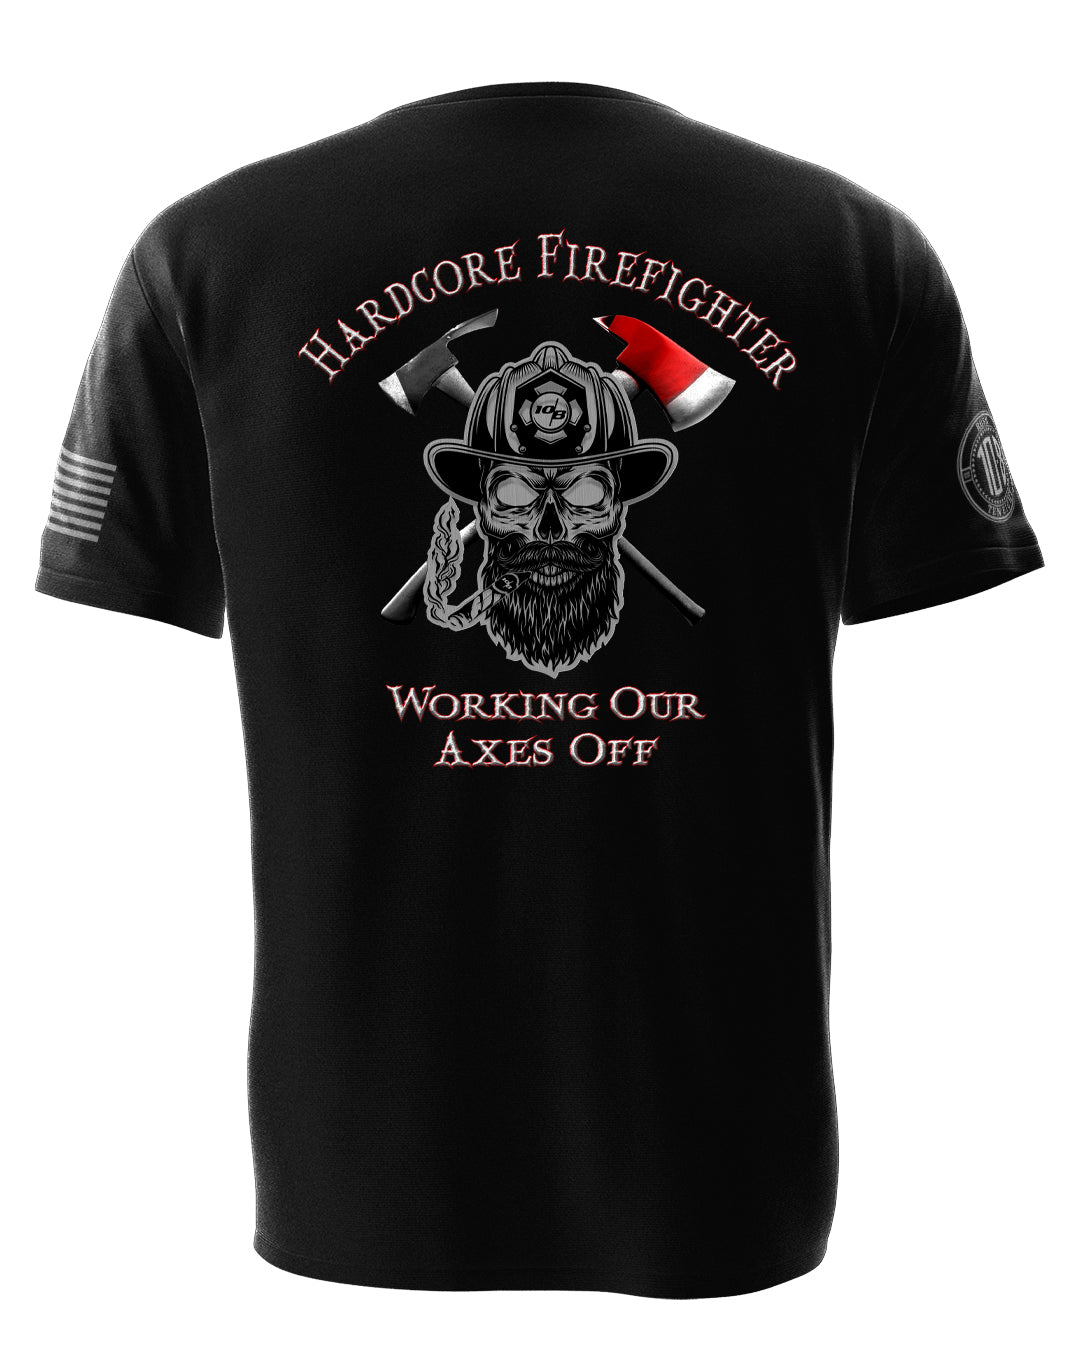 Working Our Axes Off - Hardcore Firefighter Tee